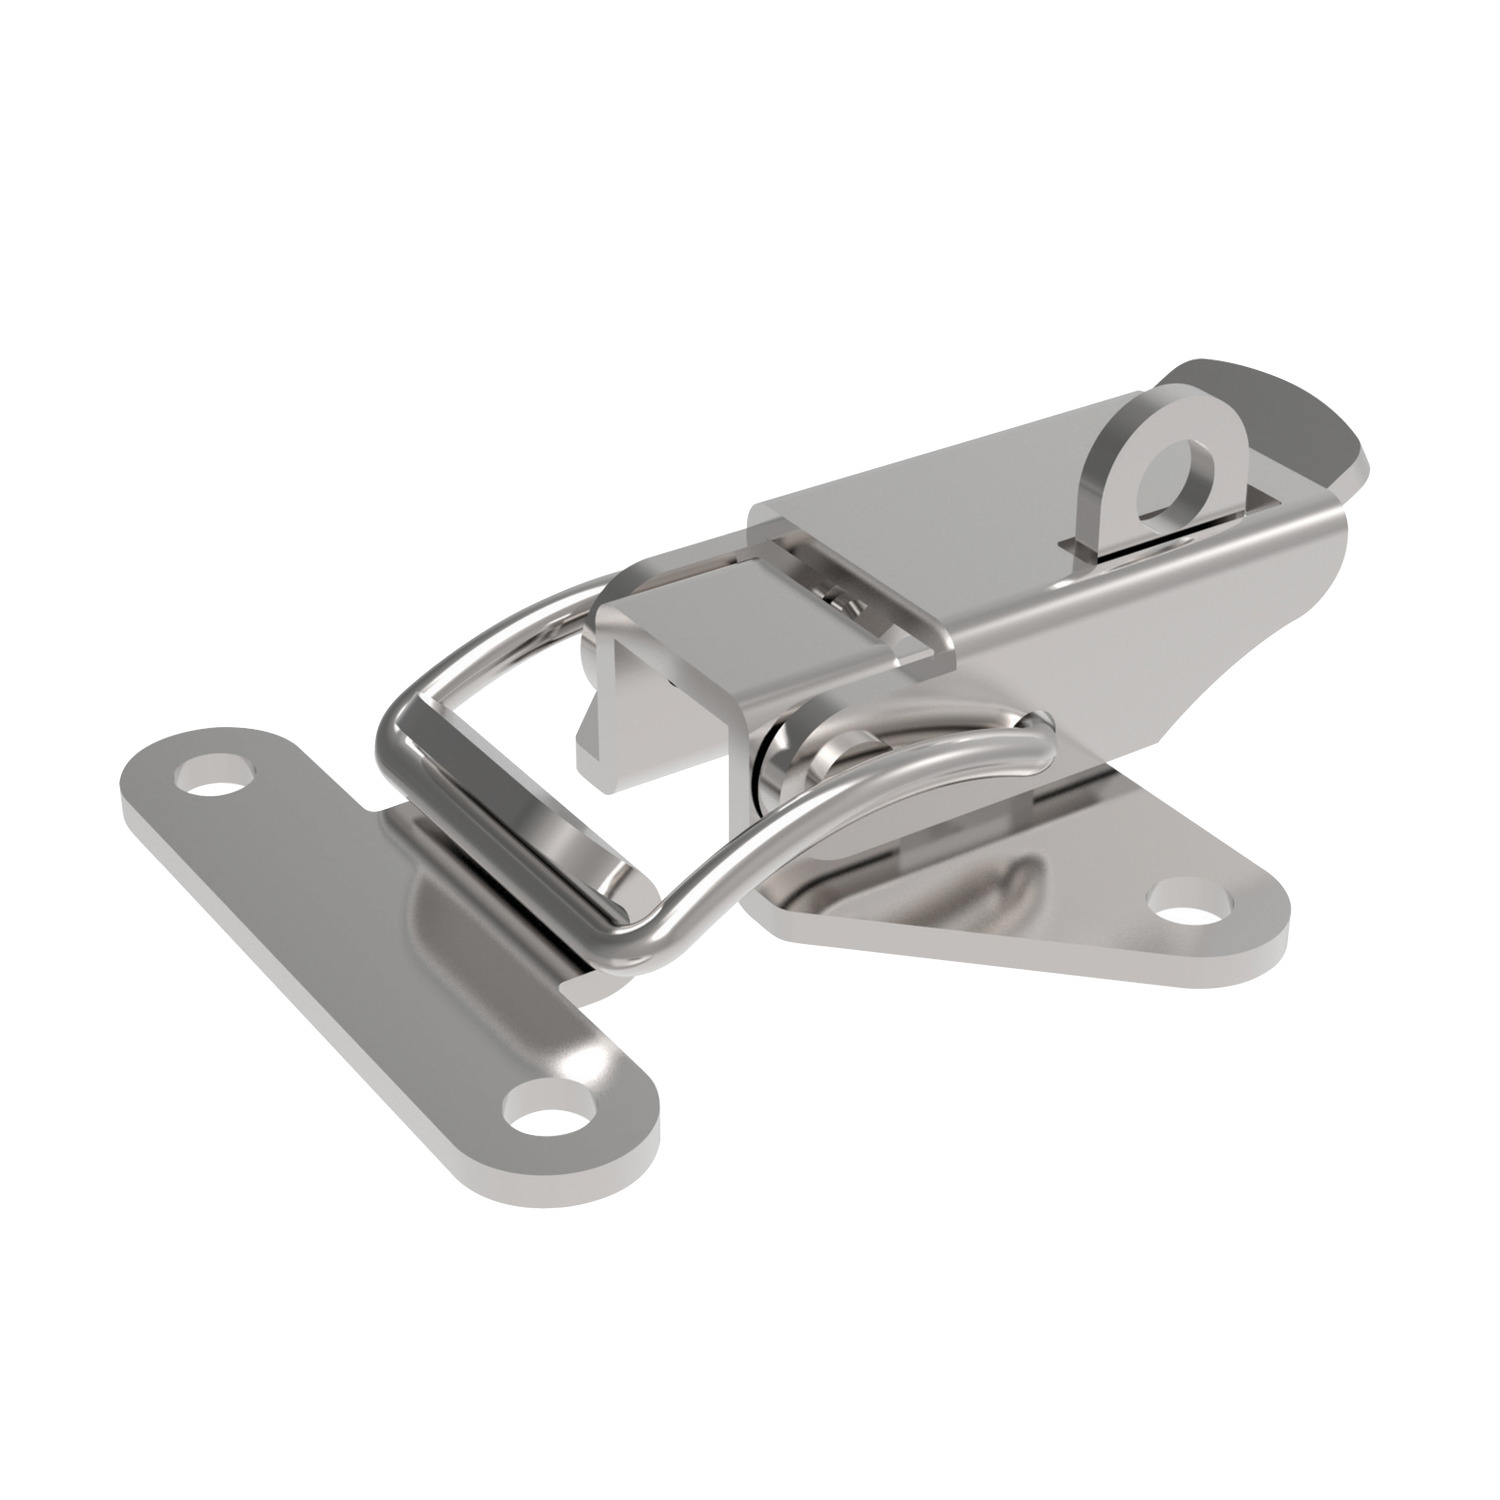 J0500.AC0001 Toggle Latches - Steel. Nickel Plated Steel - 52 - 11 - 33